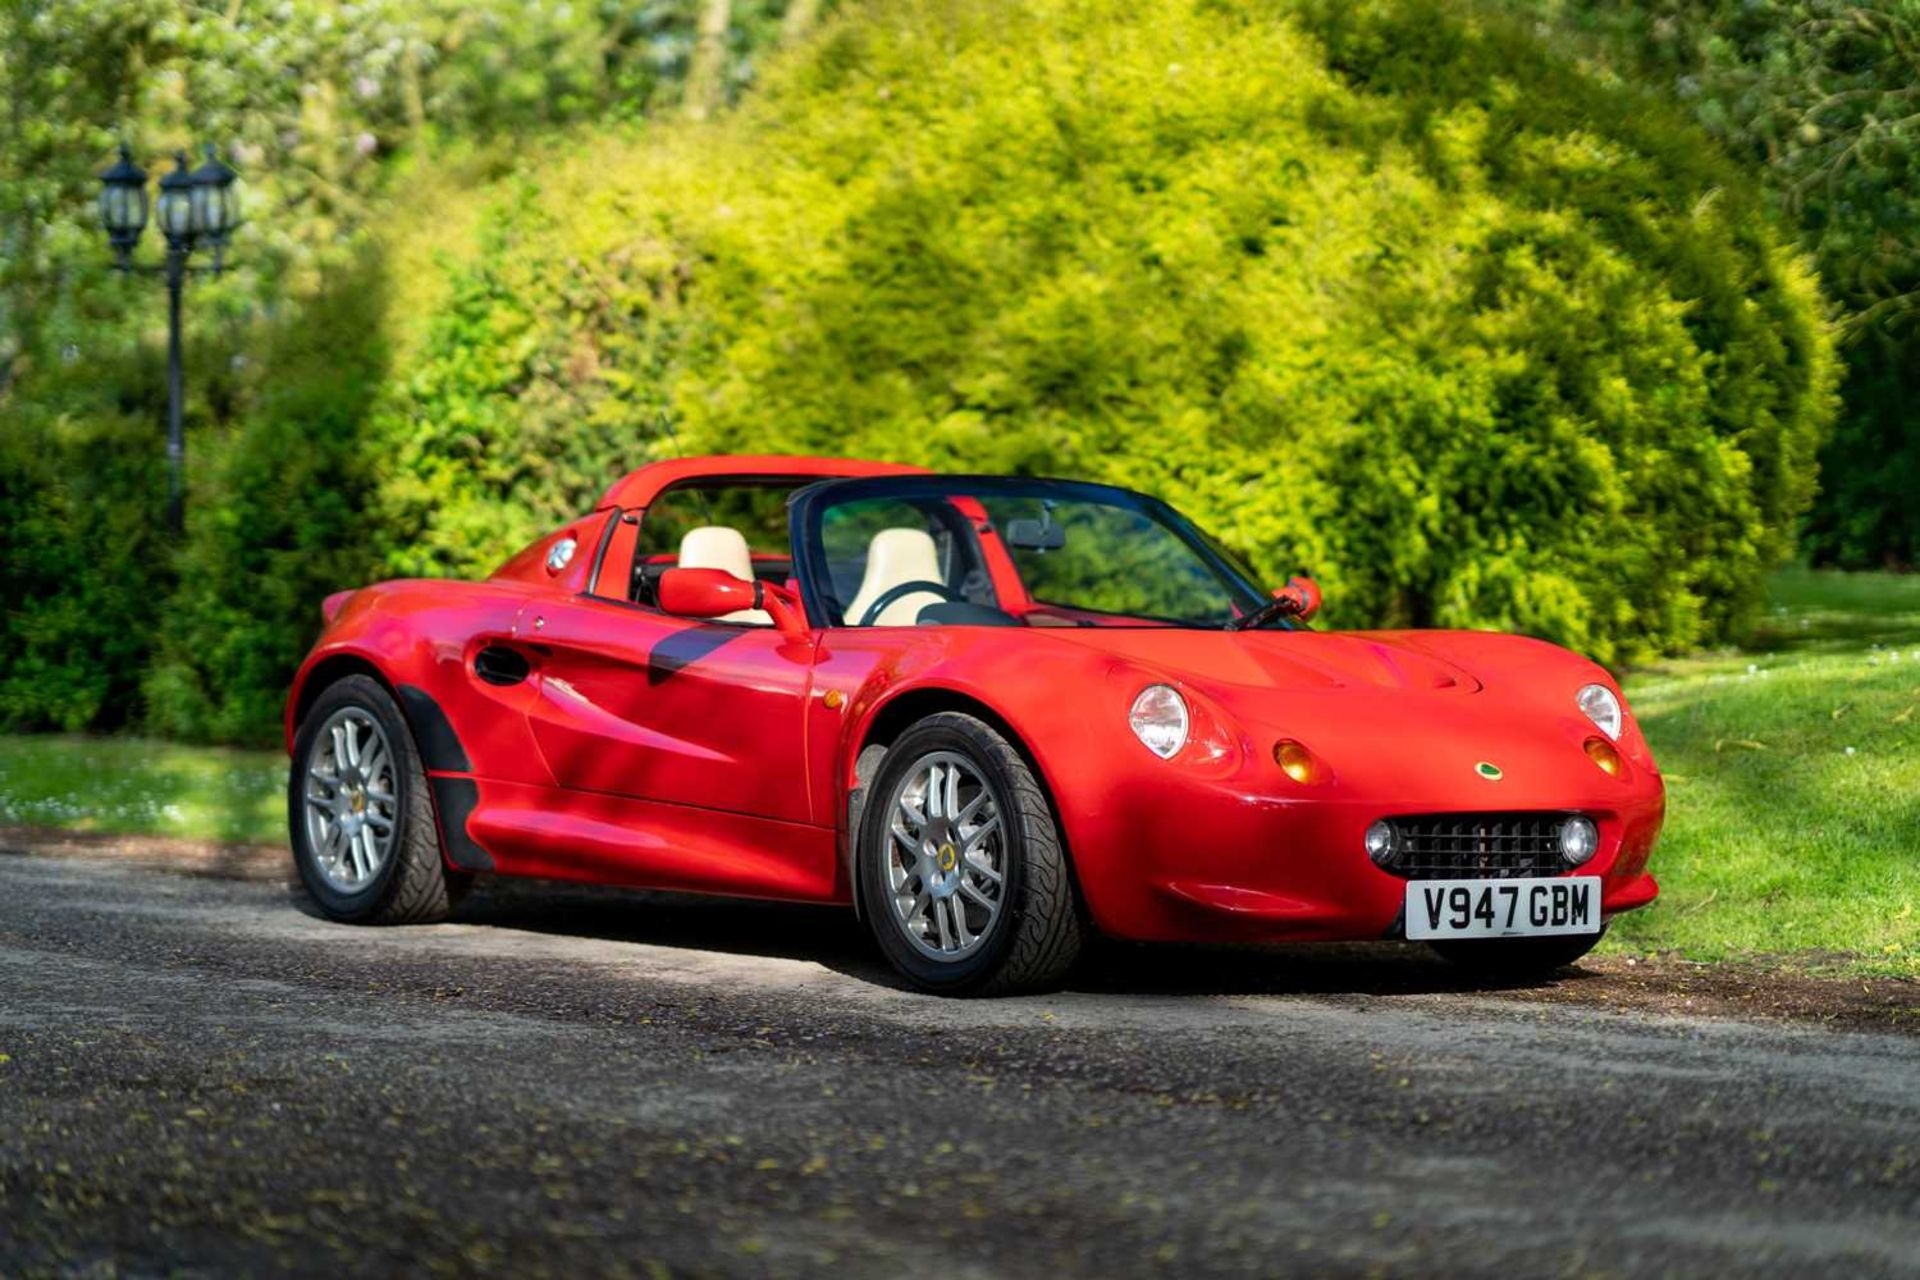 1999 Lotus Elise S1 Only 39,000 miles from new